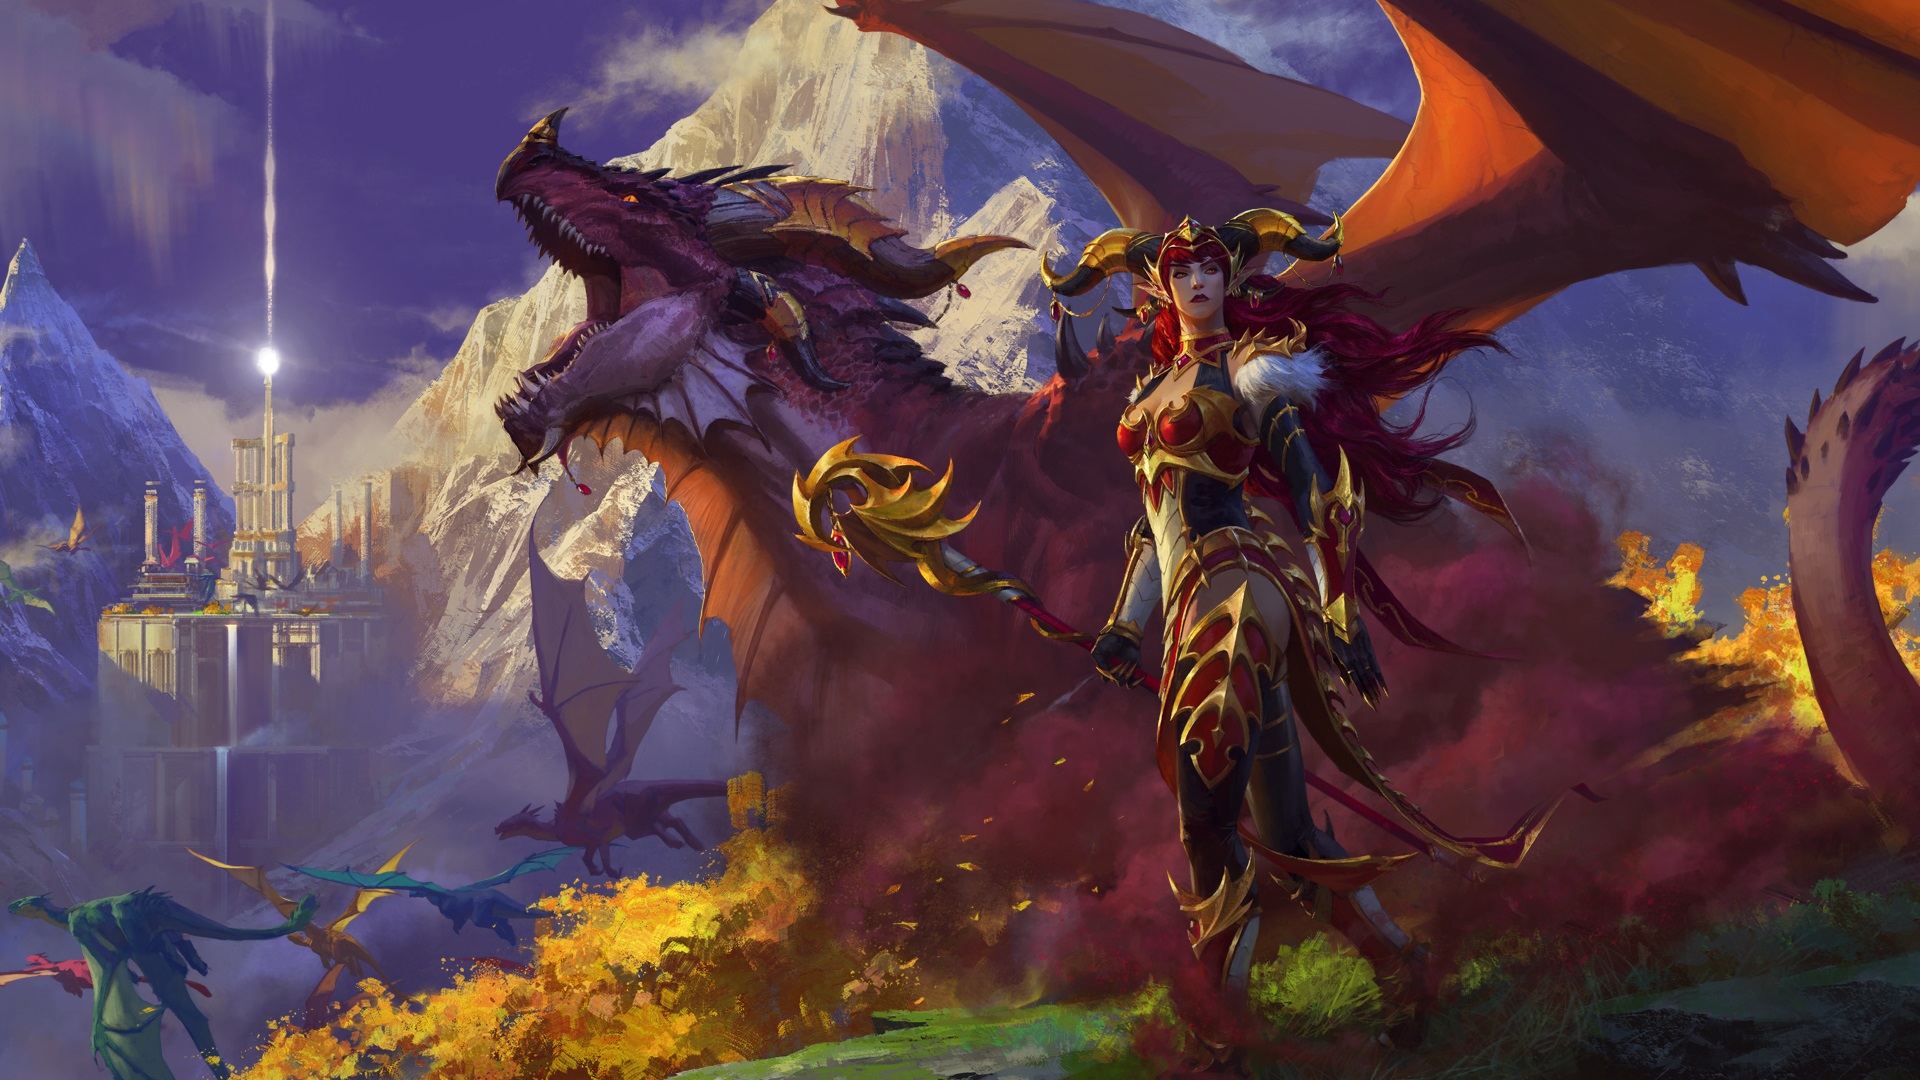 World-of-Warcraft-Dragonflight-expansion-announced-with-new-dragon-race.jpg